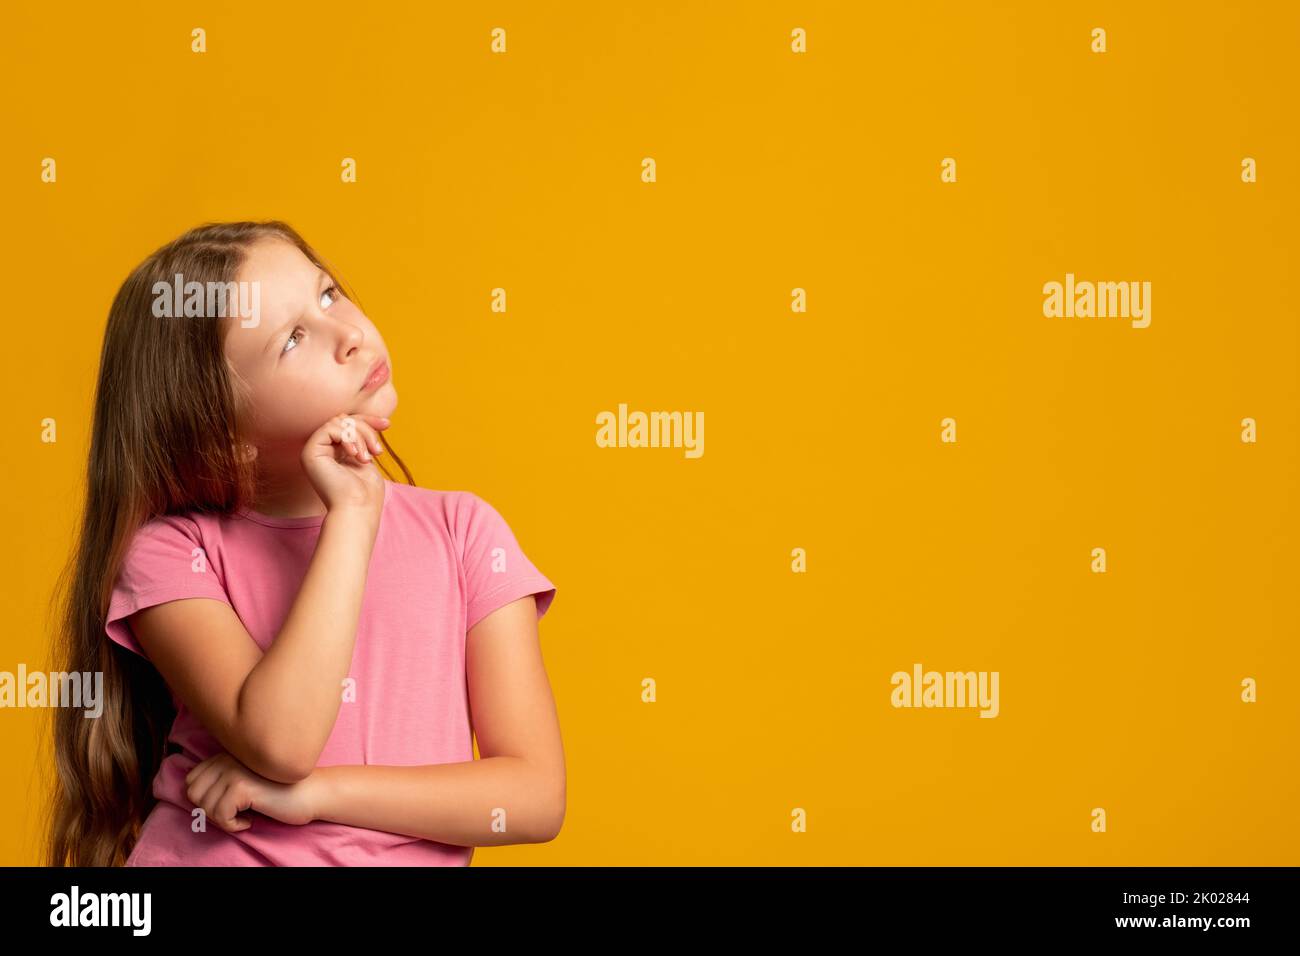 confused kid portrait motivation discovery girl Stock Photo